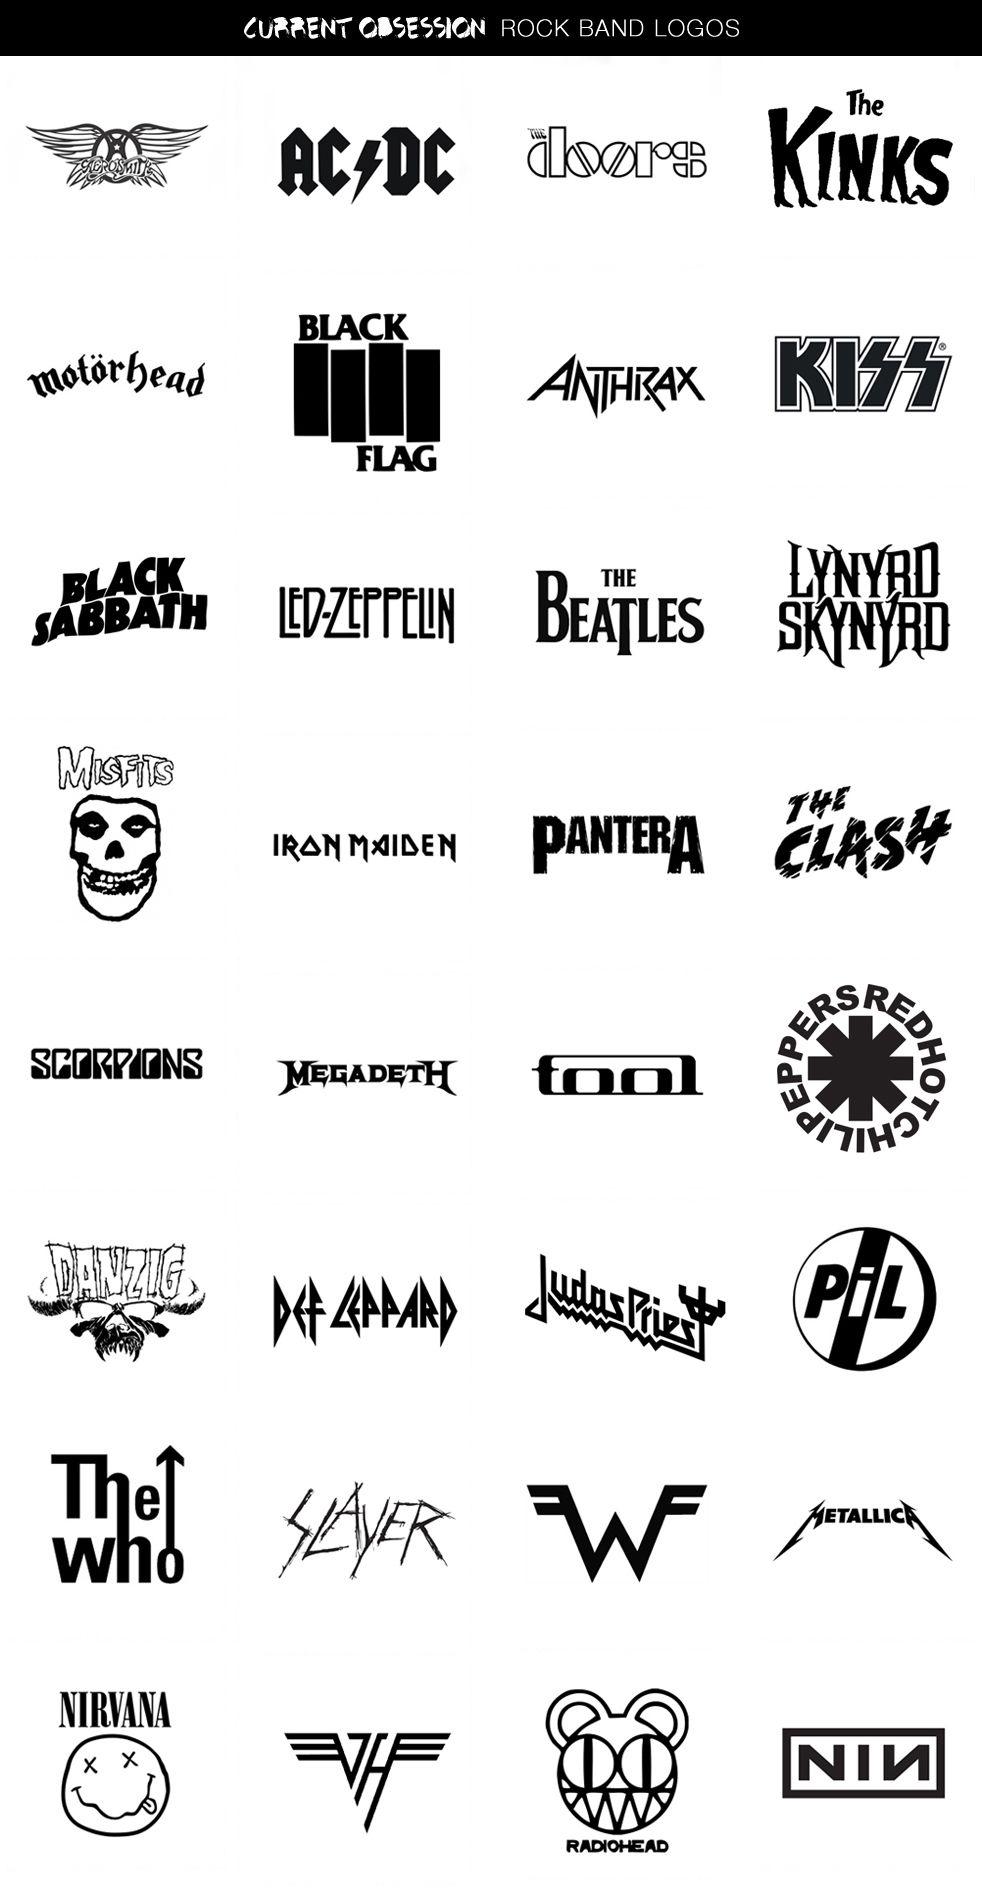 Classic Rock Band Logo - Current Obsession: Rock Band Logos | Cool Material